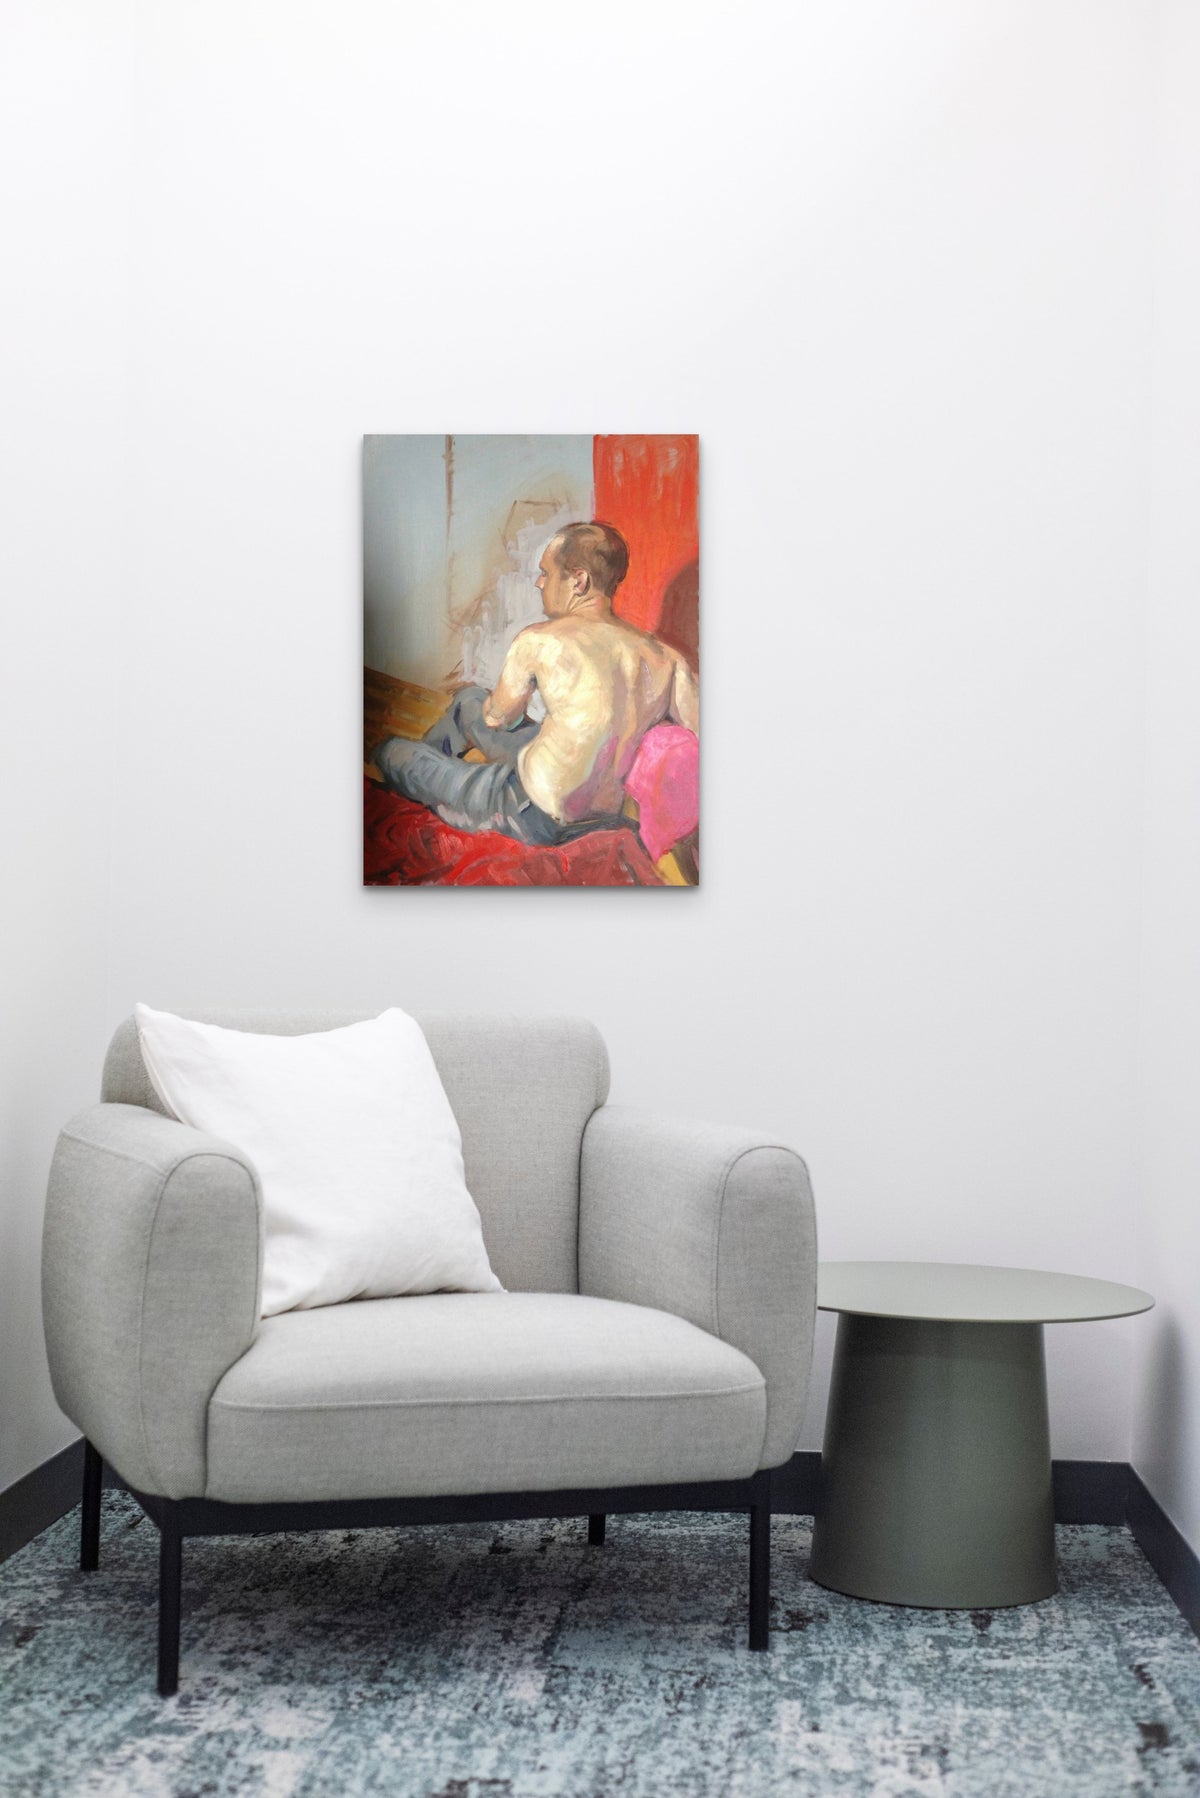 Male figurative Painting brings red color & feeling of emotion to this minimal sitting room